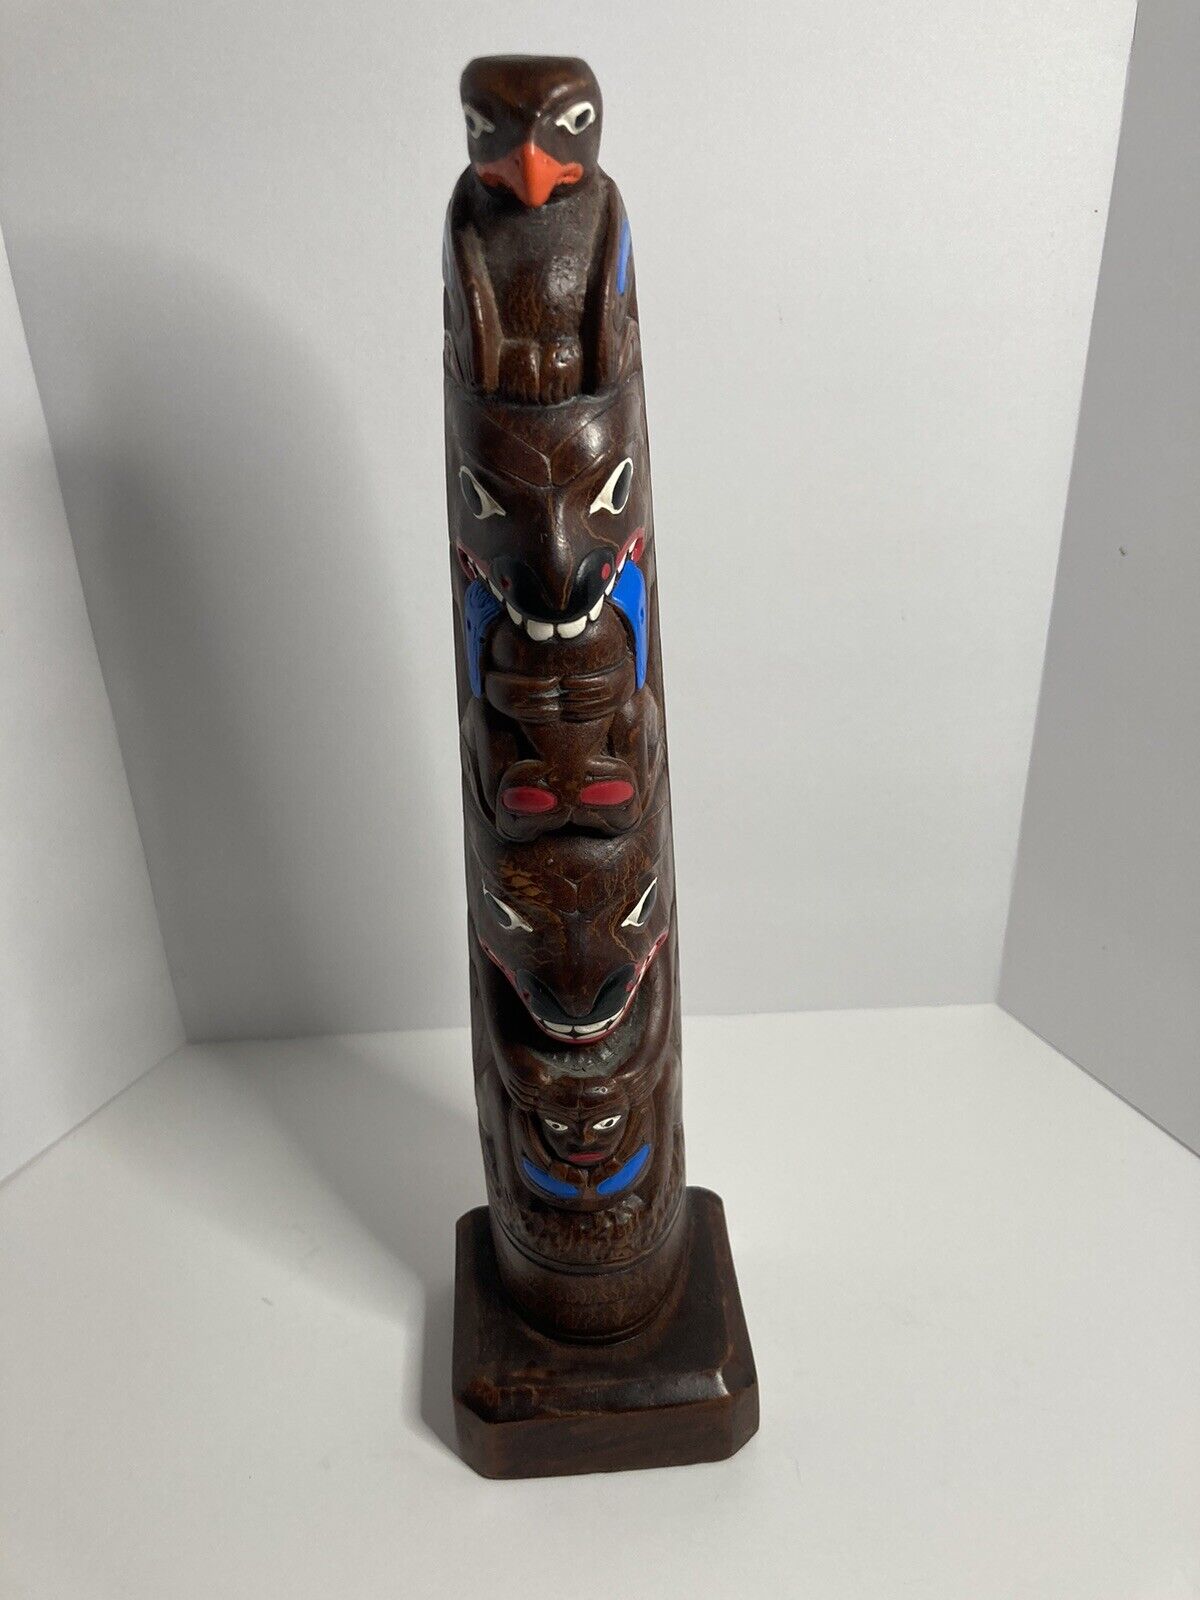 Native Alaskan Hand-Carved Totem Pole - Made In Ak, 10.5 Inches Tall - Beautiful